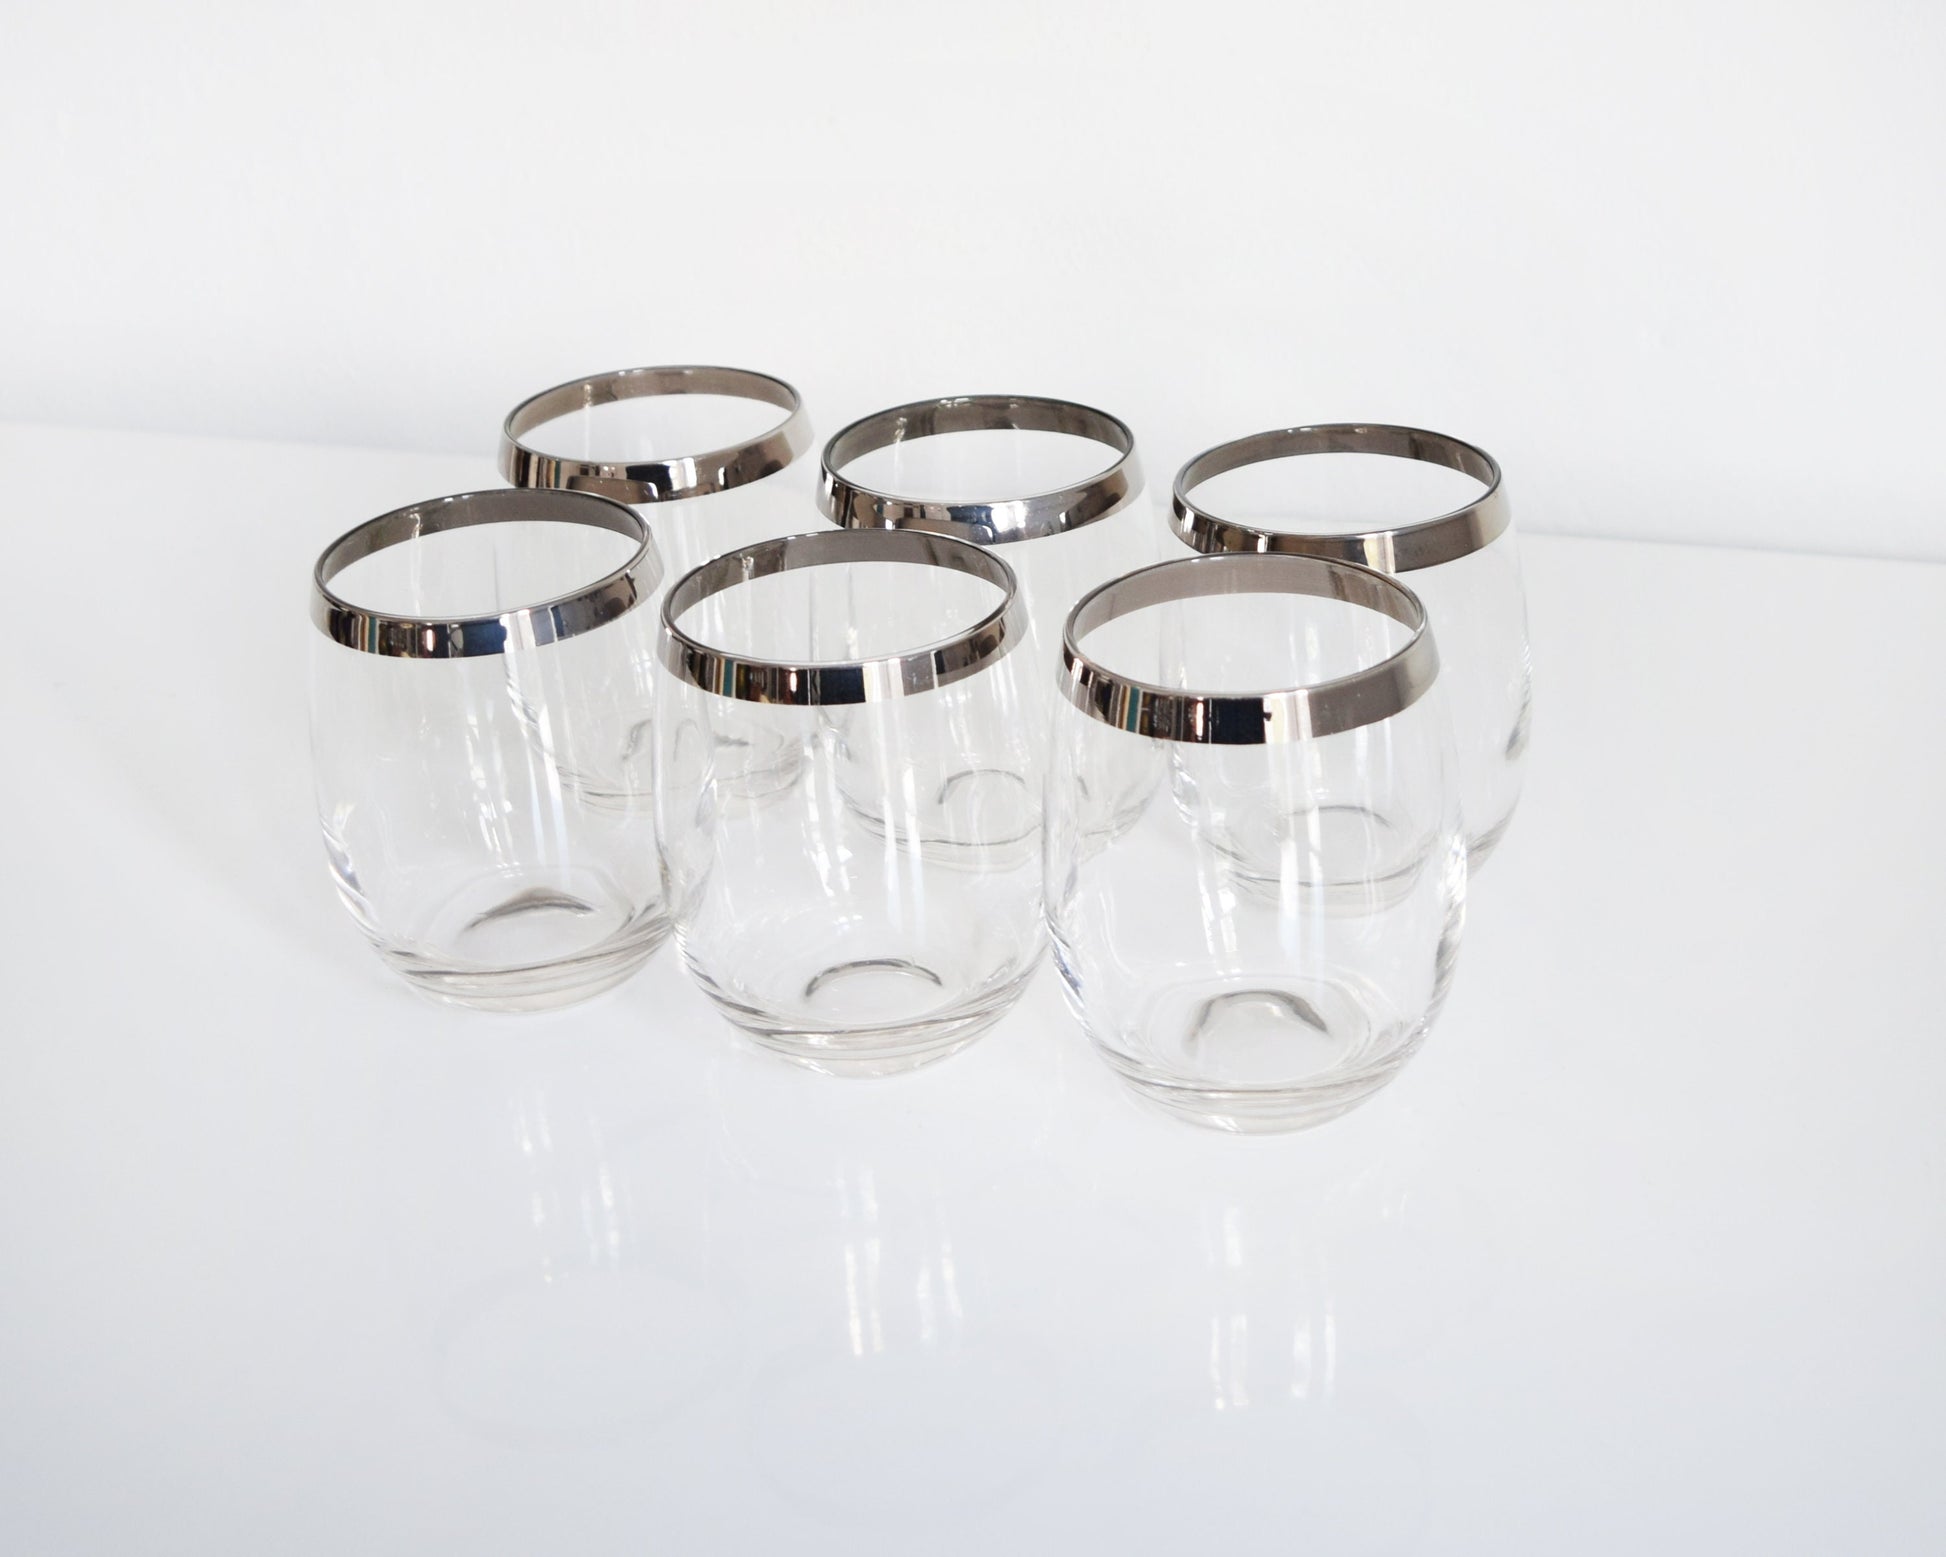 A set of 6 vintage 60s sliver rim tumblers that have an elongated roly poly shape